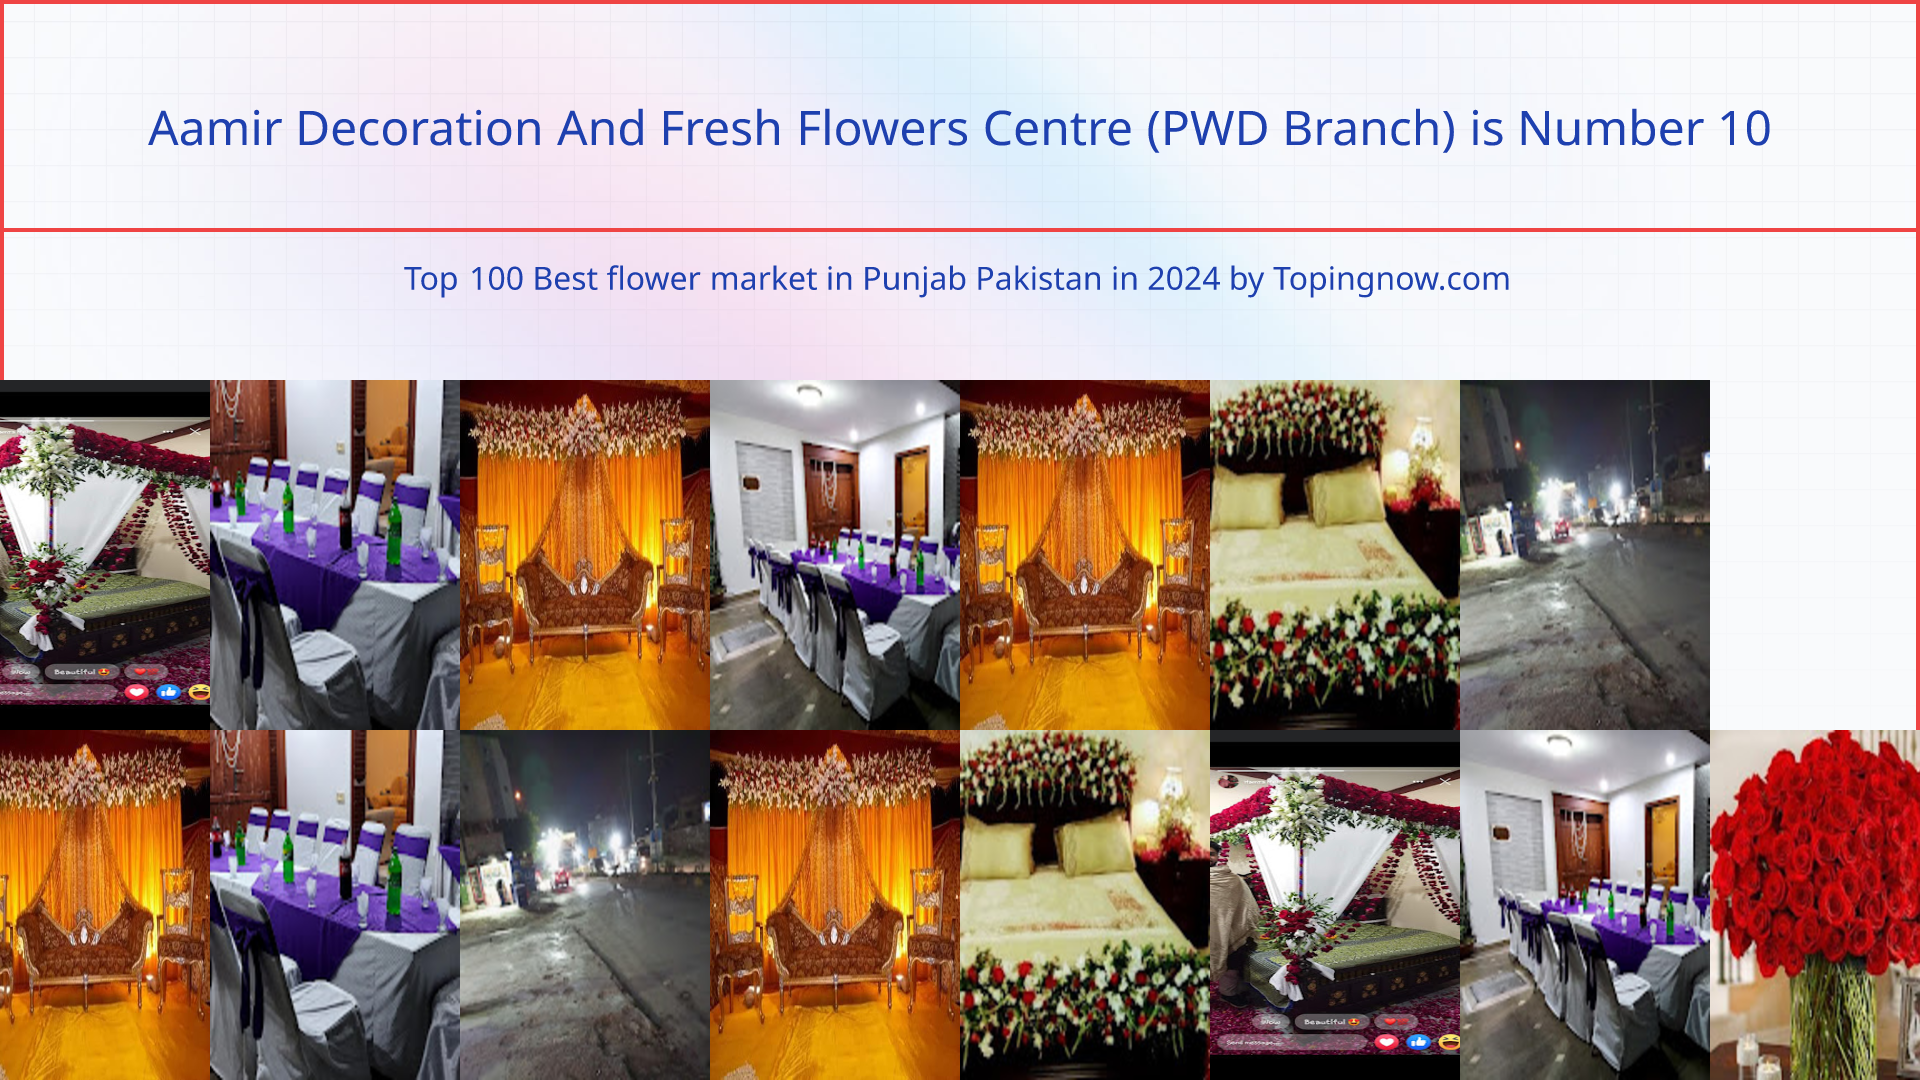 Aamir Decoration And Fresh Flowers Centre (PWD Branch): Top 100 Best flower market in Punjab Pakistan in 2024